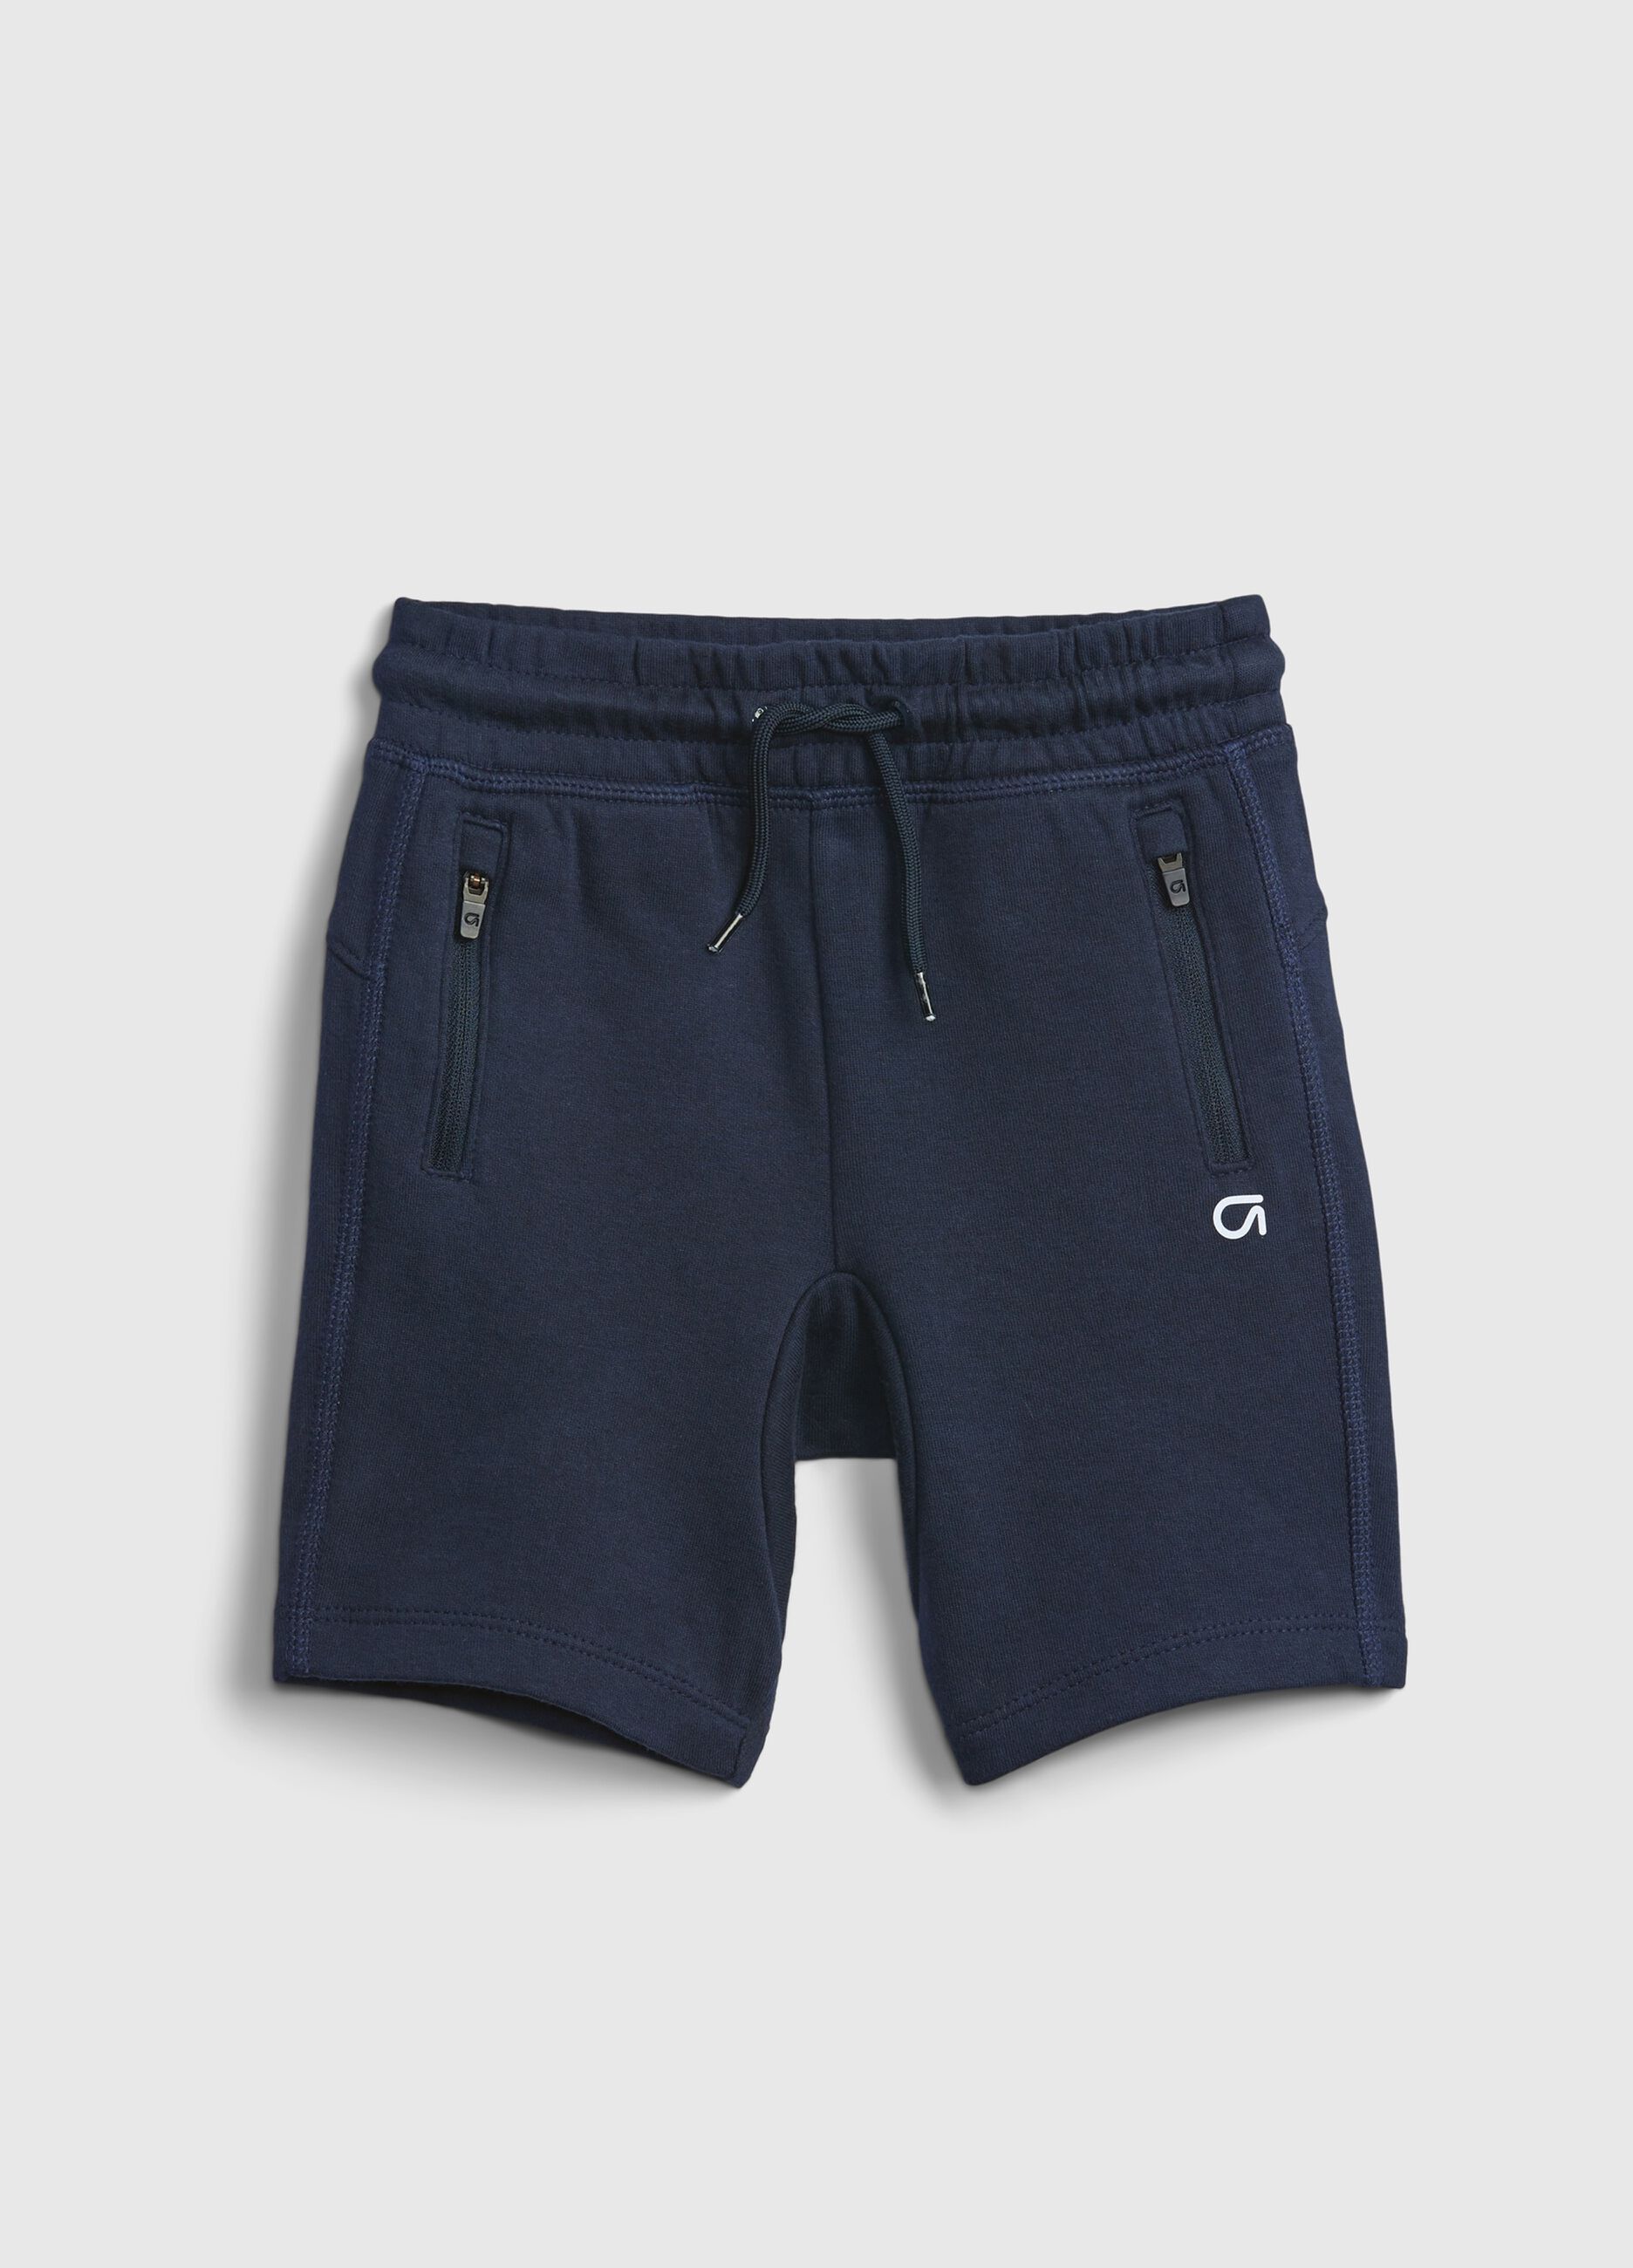 Technical fabric shorts with drawstring